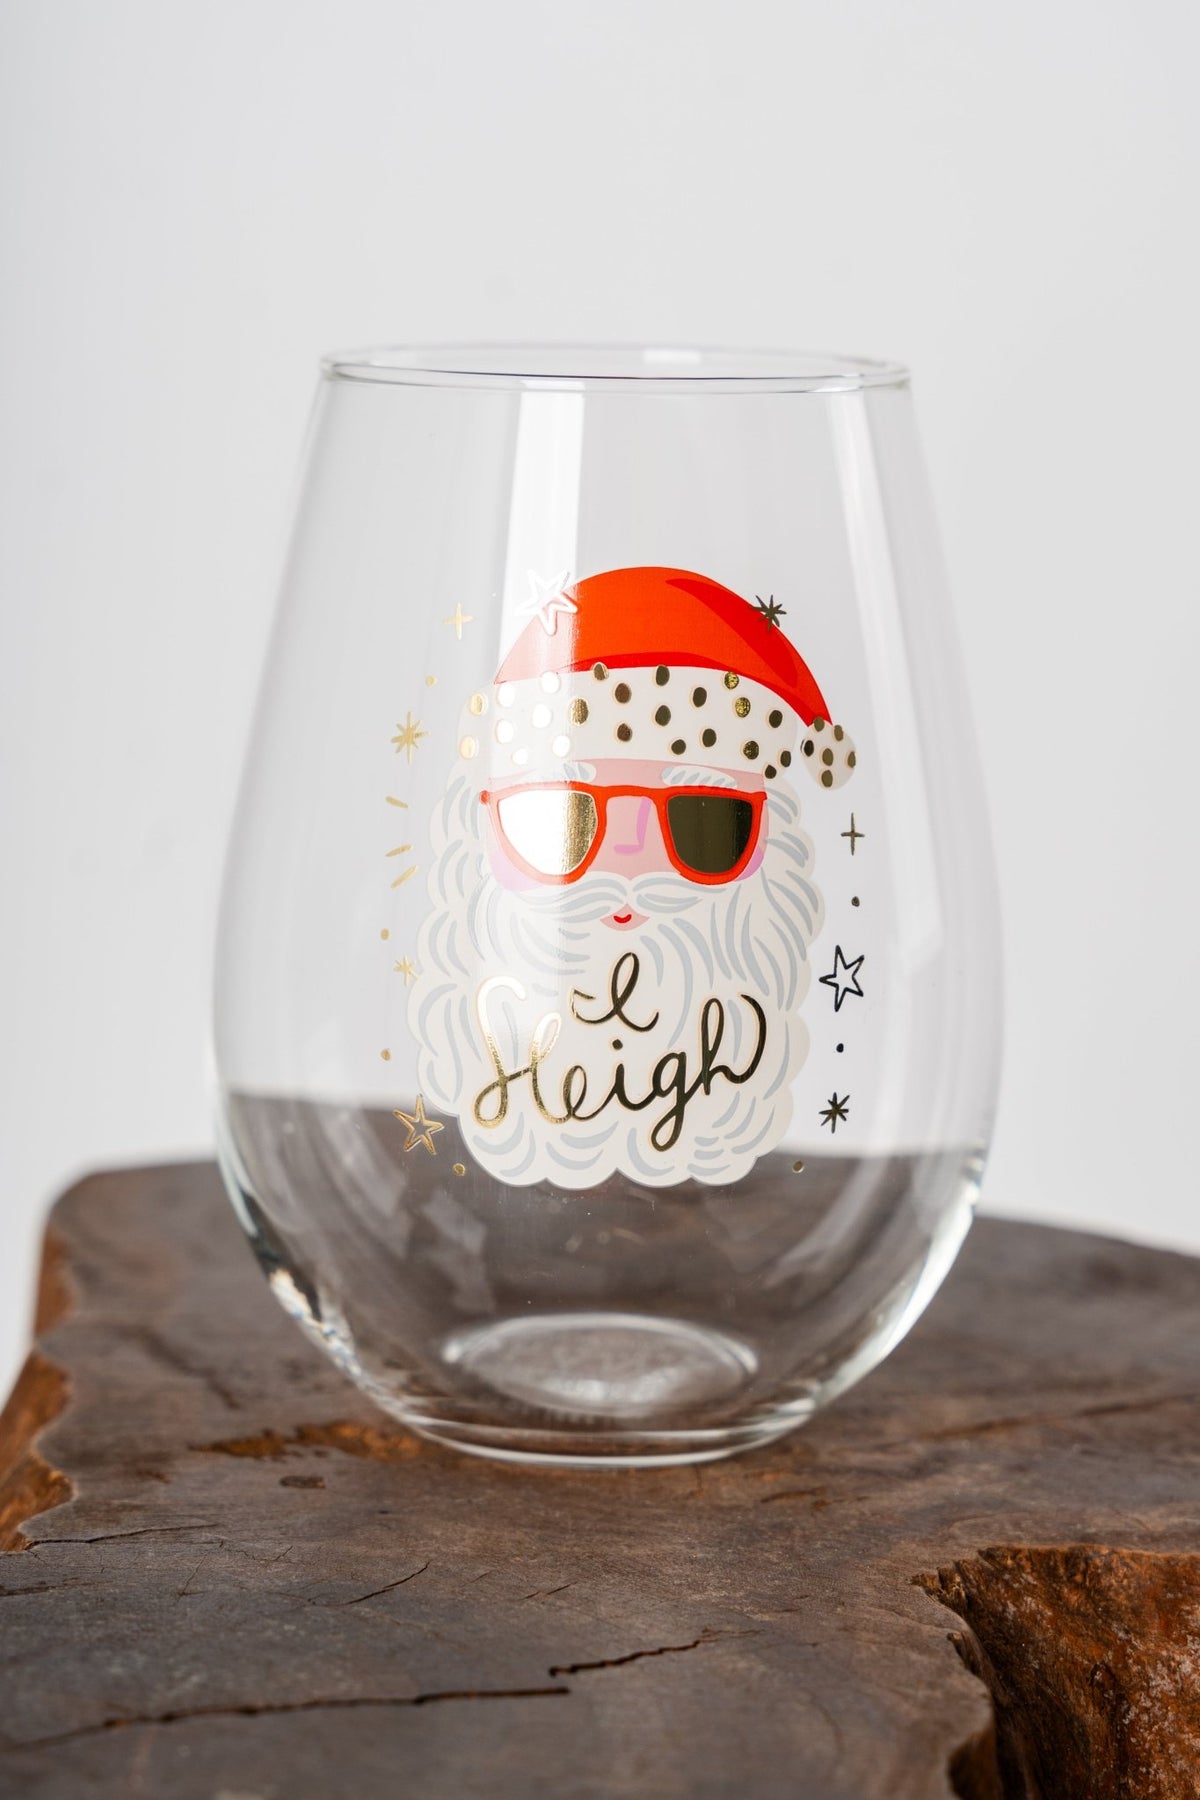 I sleigh 30 ounce stemless wine glass - Trendy Holiday Apparel at Lush Fashion Lounge Boutique in Oklahoma City